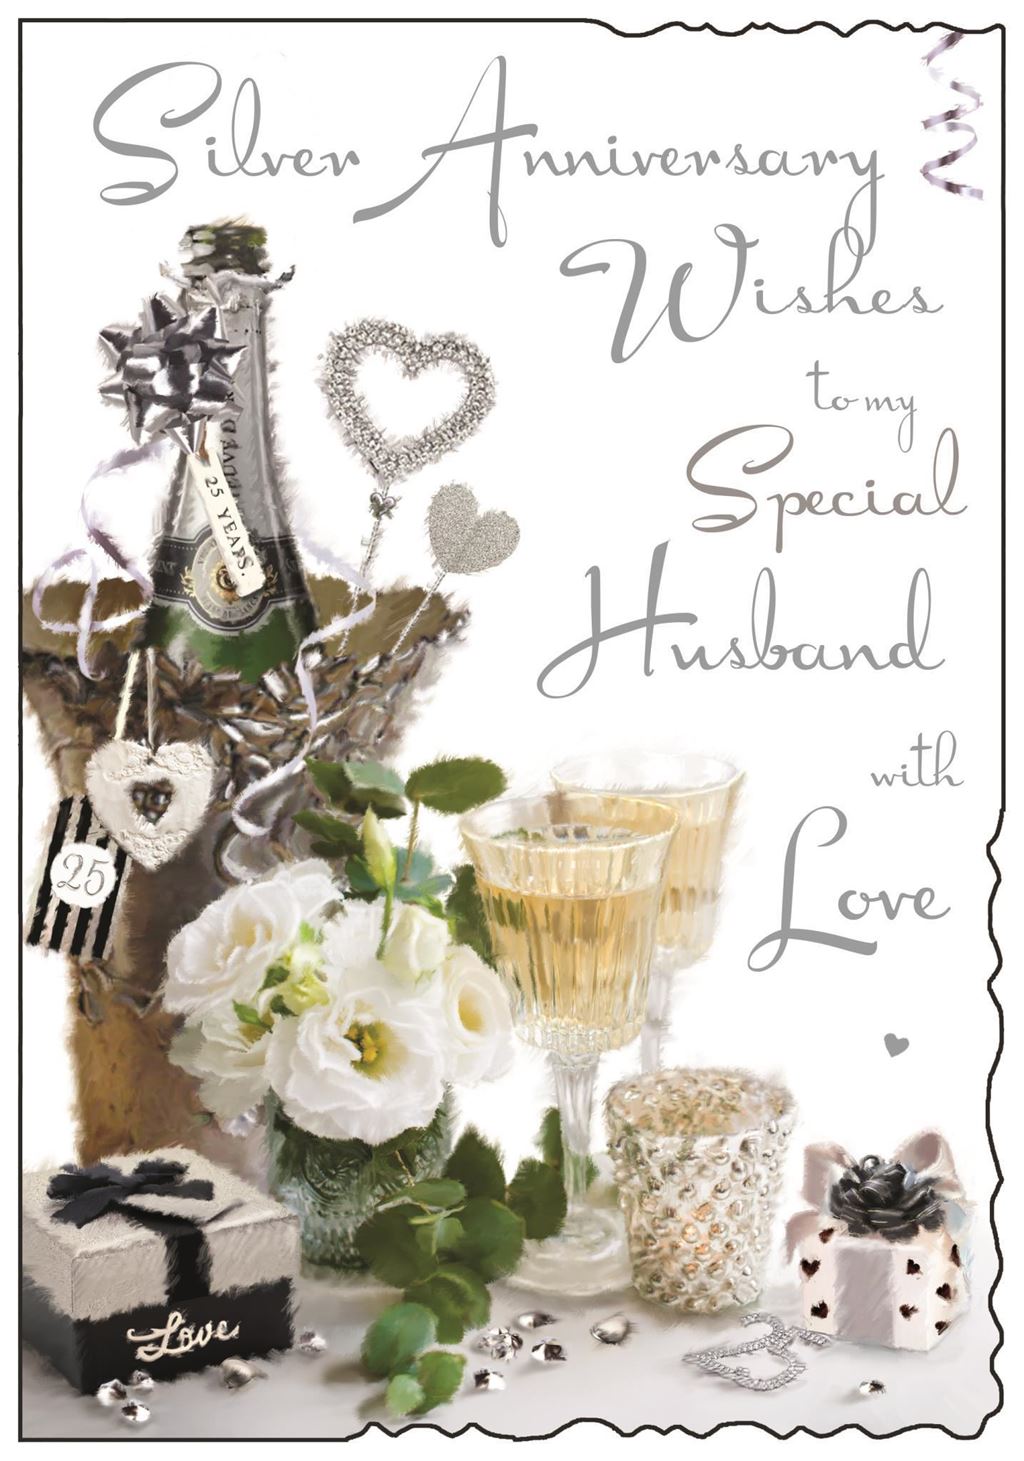 Husband's 25th Wedding Anniversary Card - Bouquet, Champagne and Gifts 